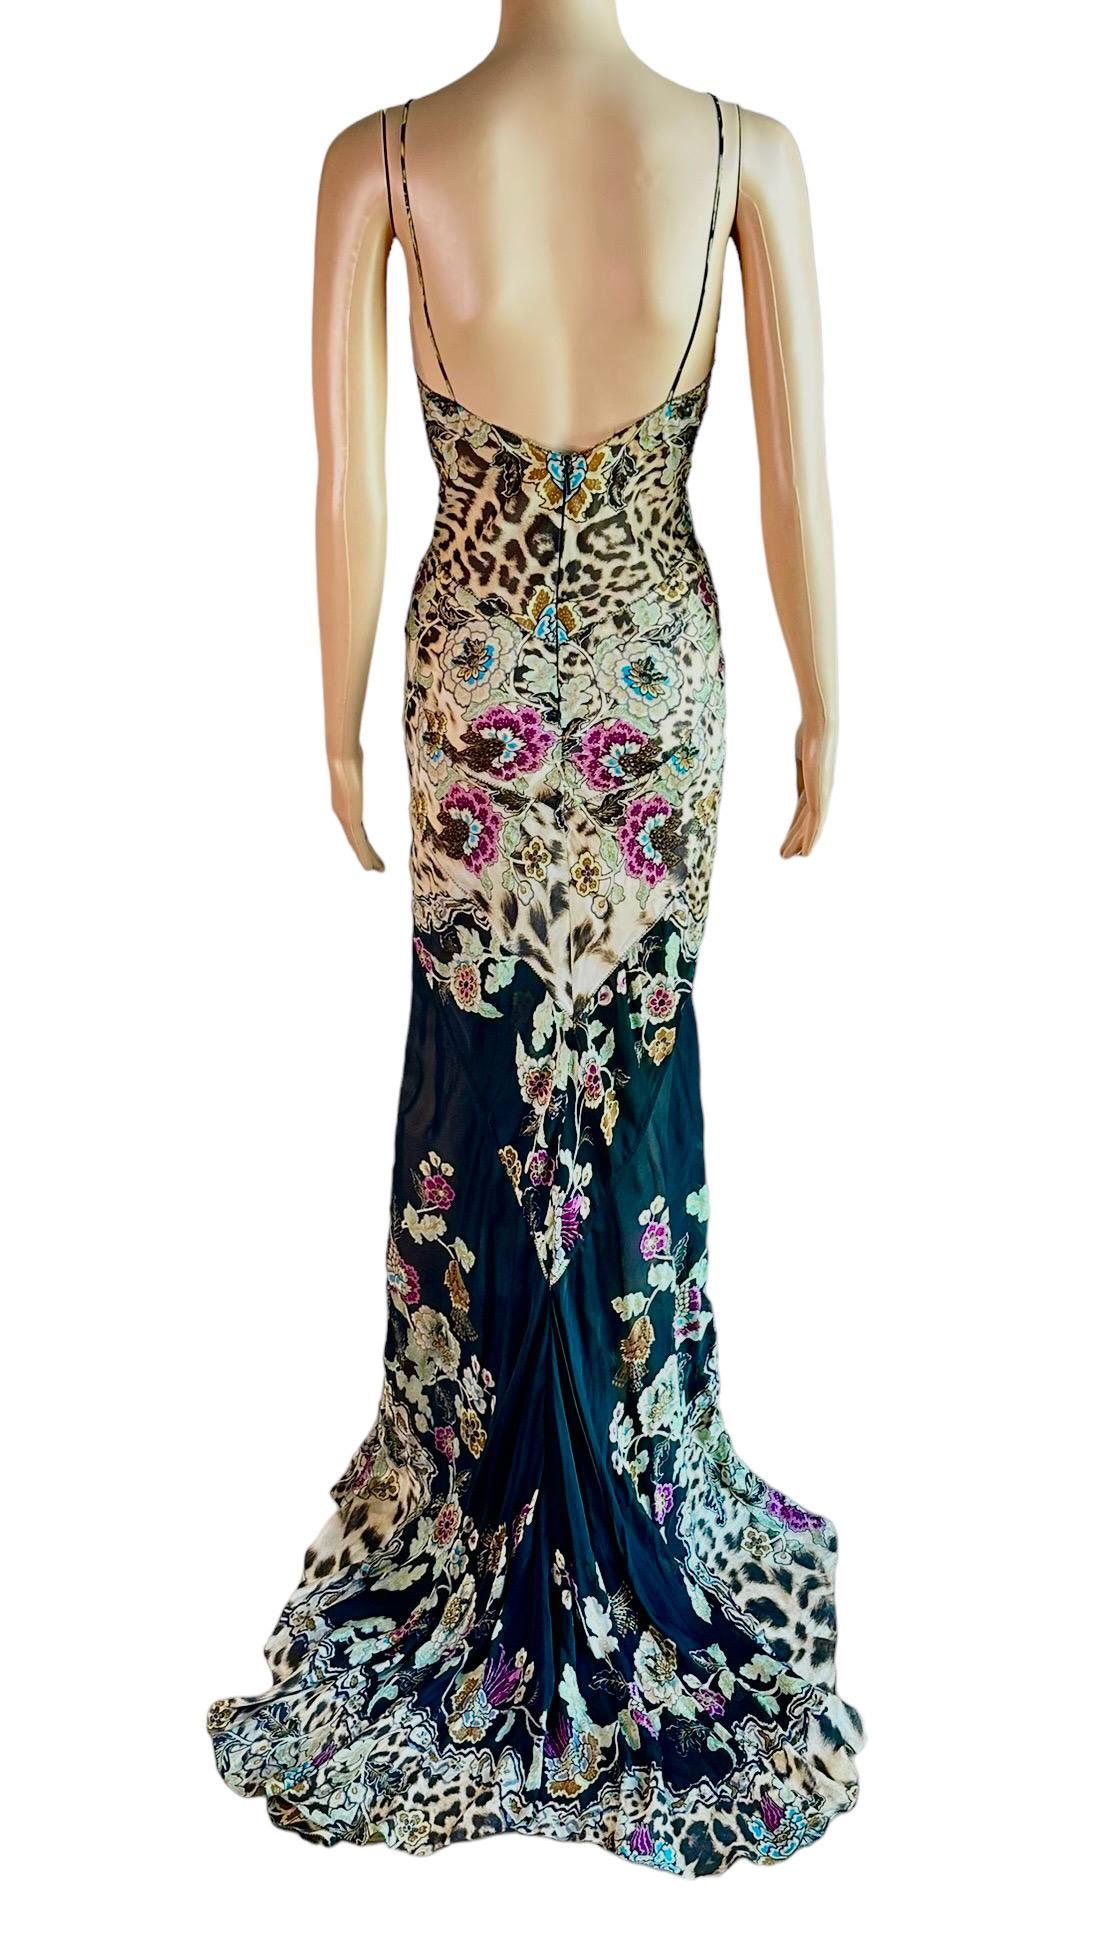 Roberto Cavalli S/S 2003 Chinoiserie Print Silk Train Maxi Evening Dress Gown In Good Condition For Sale In Naples, FL